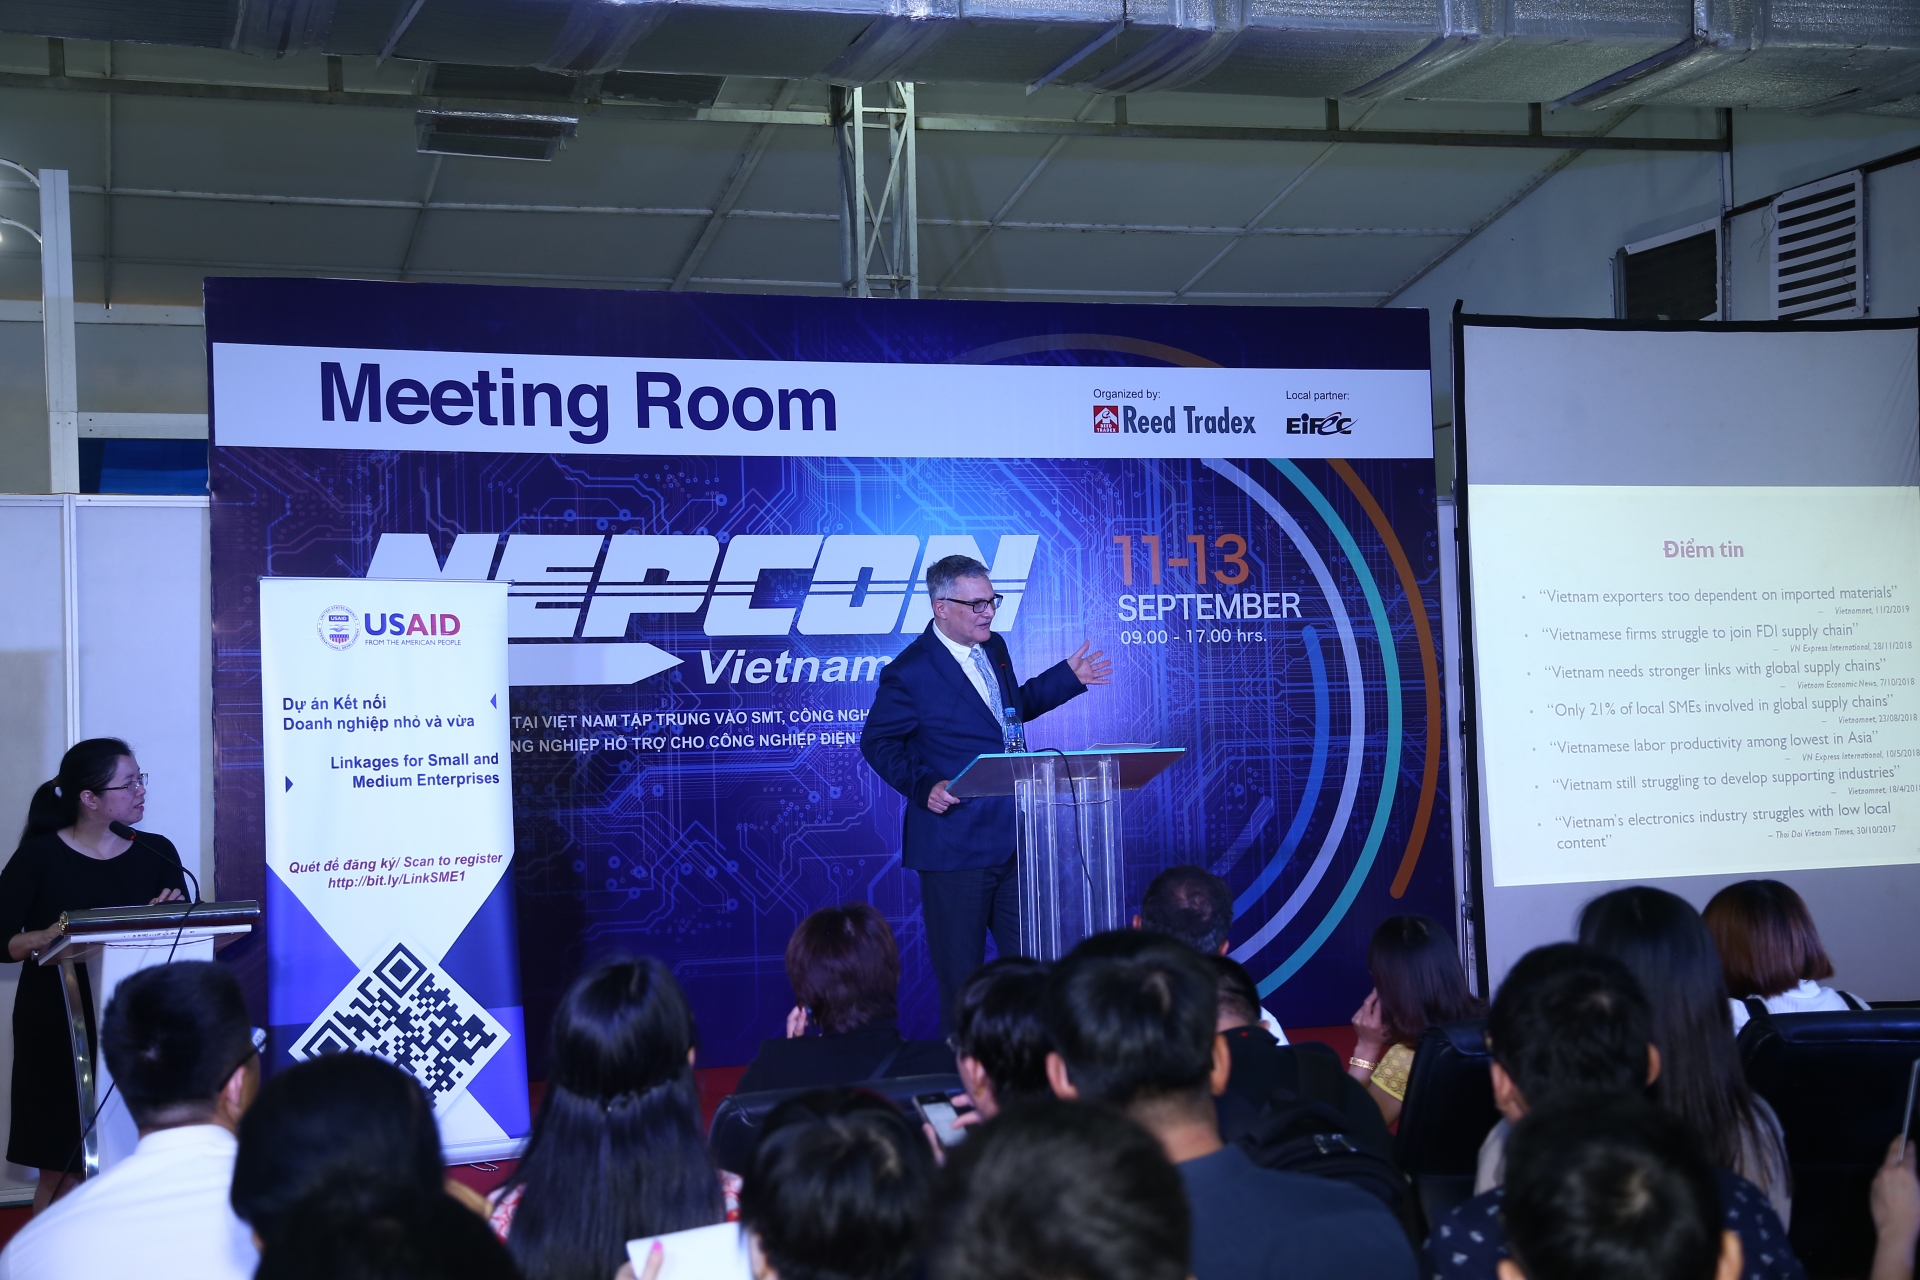 NEPCON Vietnam 2019 - great chance for SMEs to join global supply chains